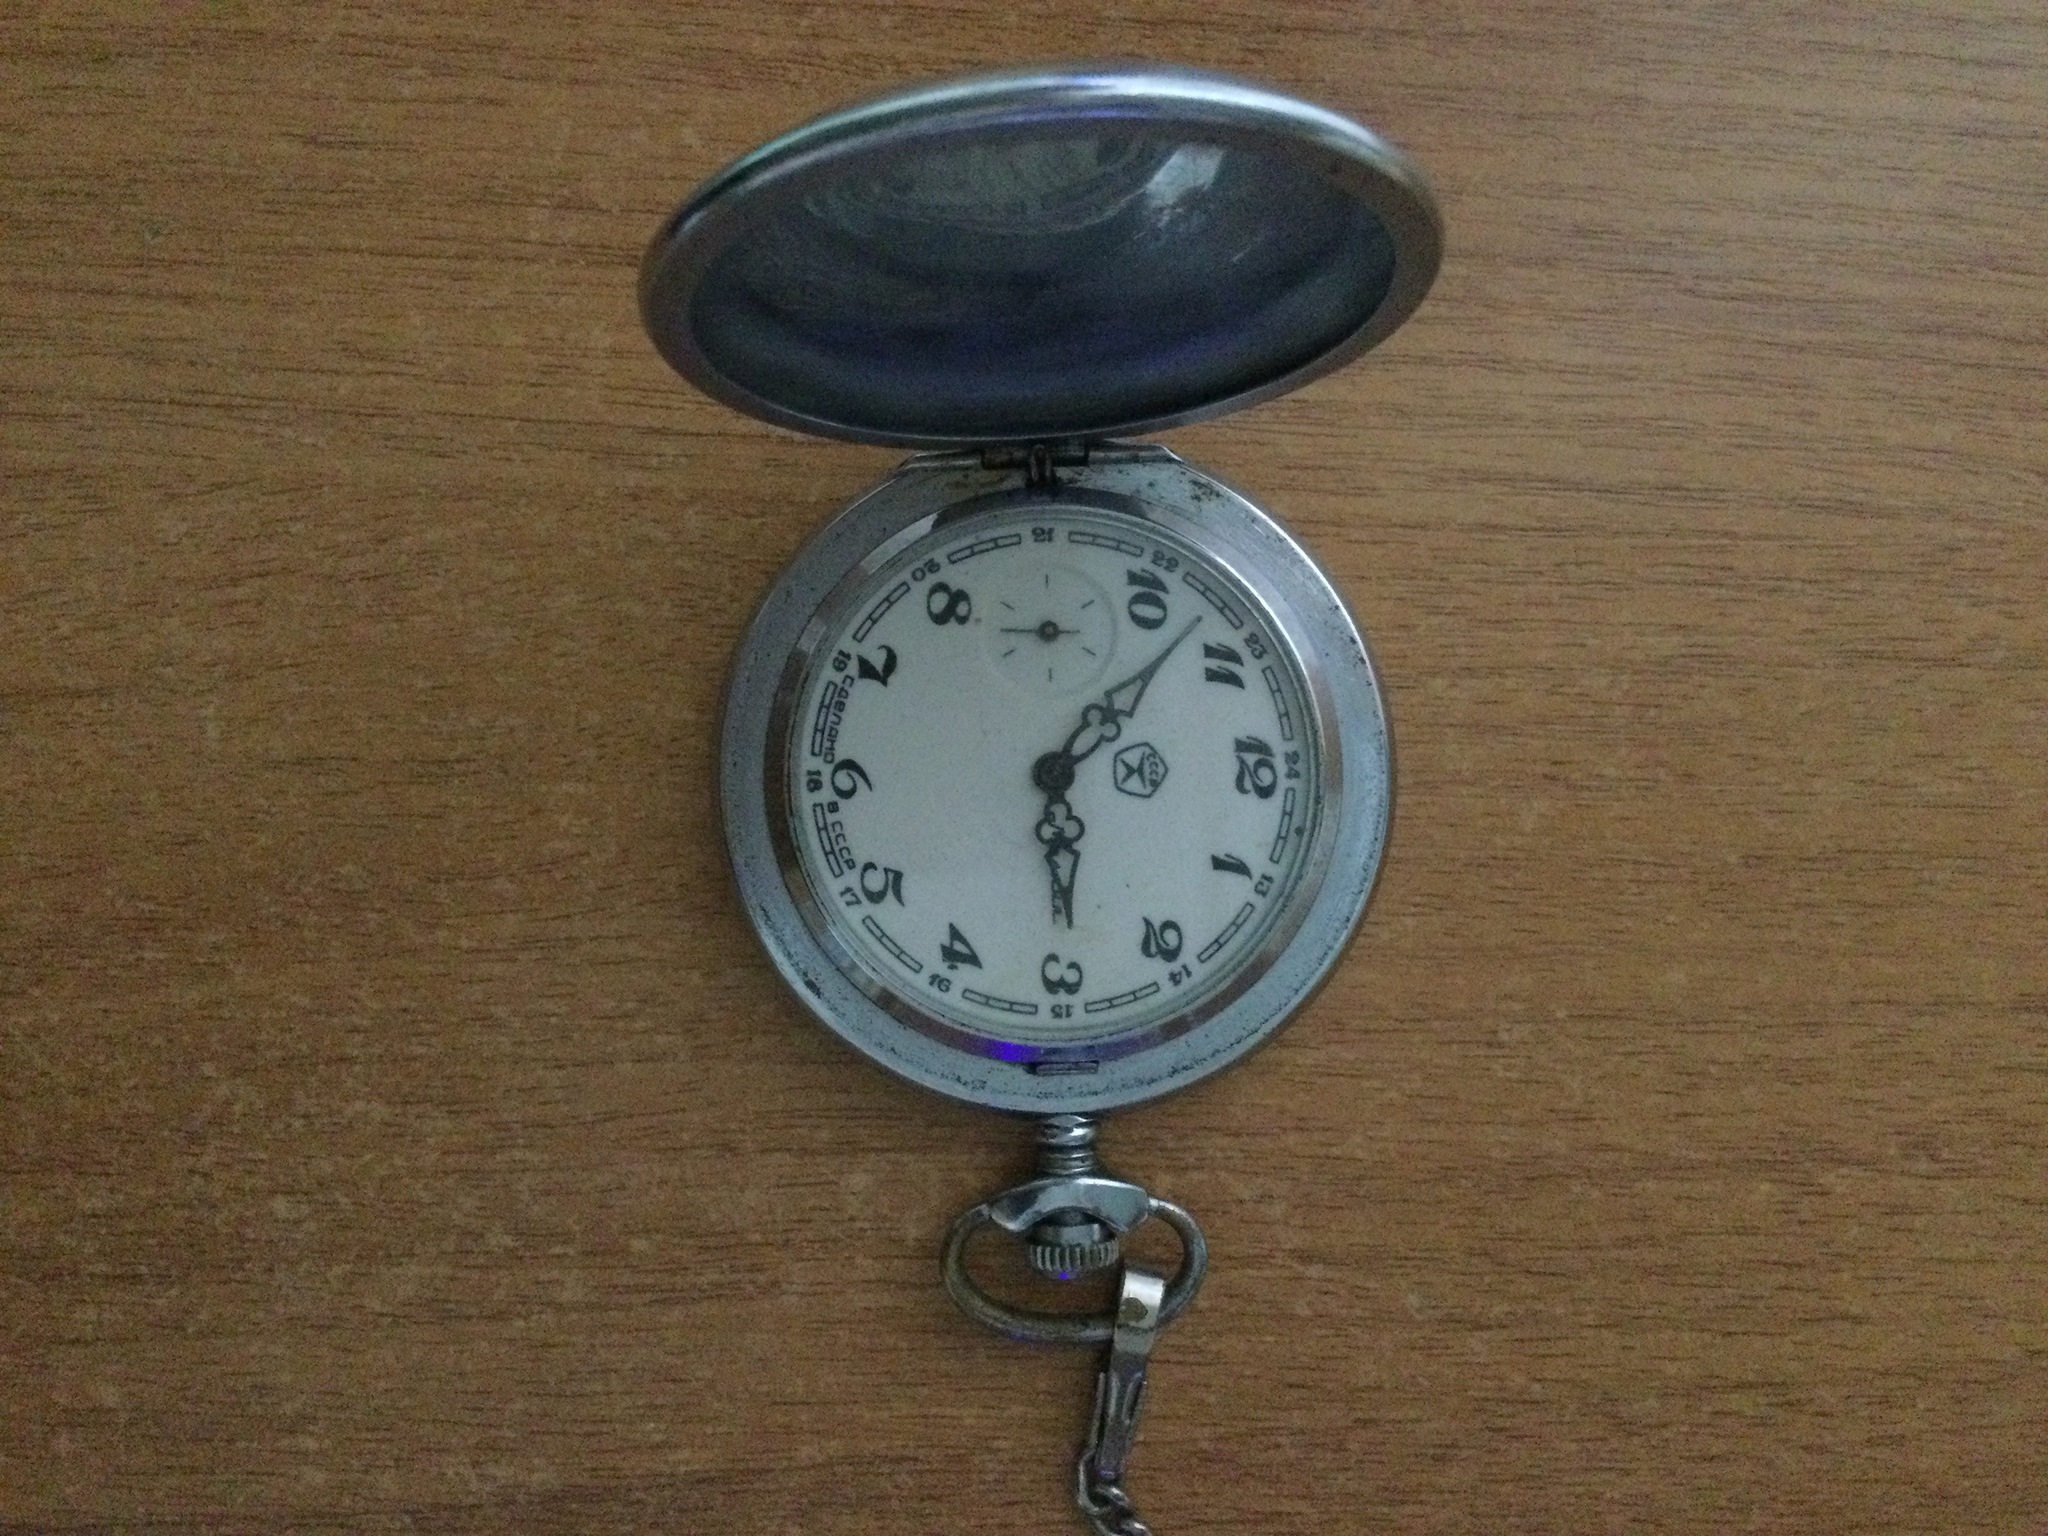 Help identifying watches - My, Help, Clock, Wrist Watch, Mechanical watches, Repair, Made in USSR, Consultation, Longpost